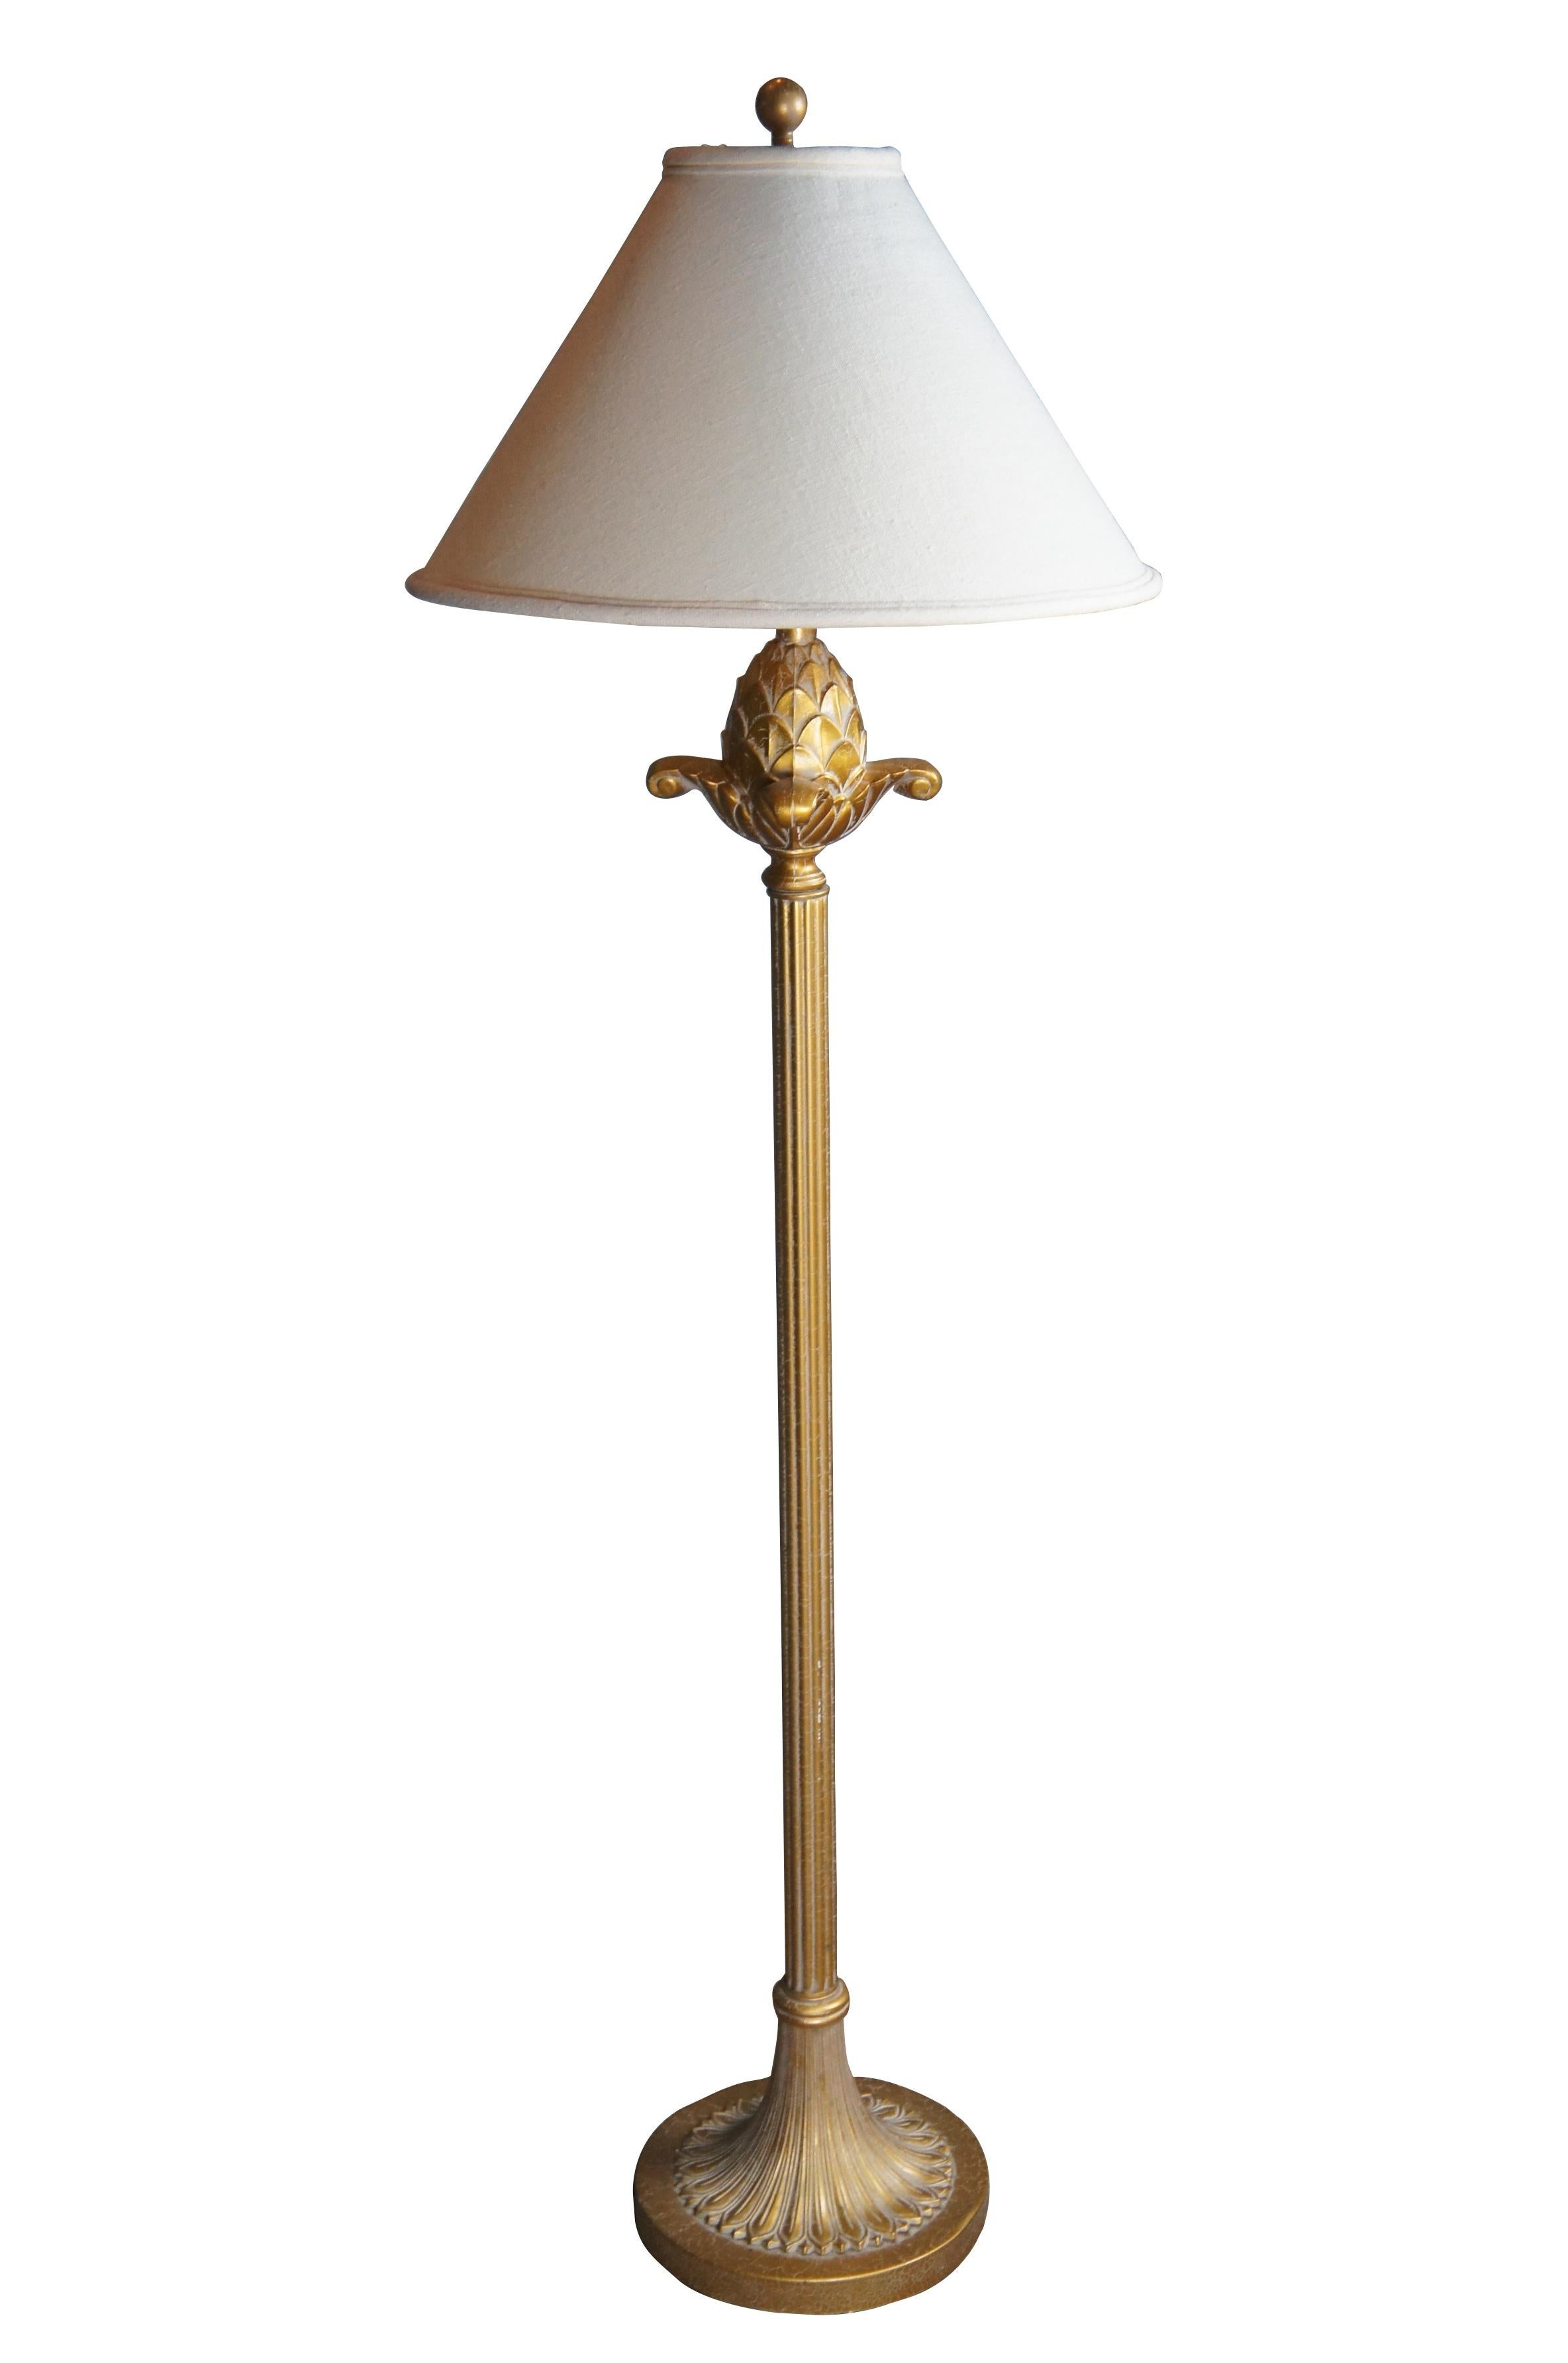 Vintage Stiffel Hollywood Regency style floor lamp featuring fluted column and pineapple deseign with gold crackle finish.

Dimesions:
58